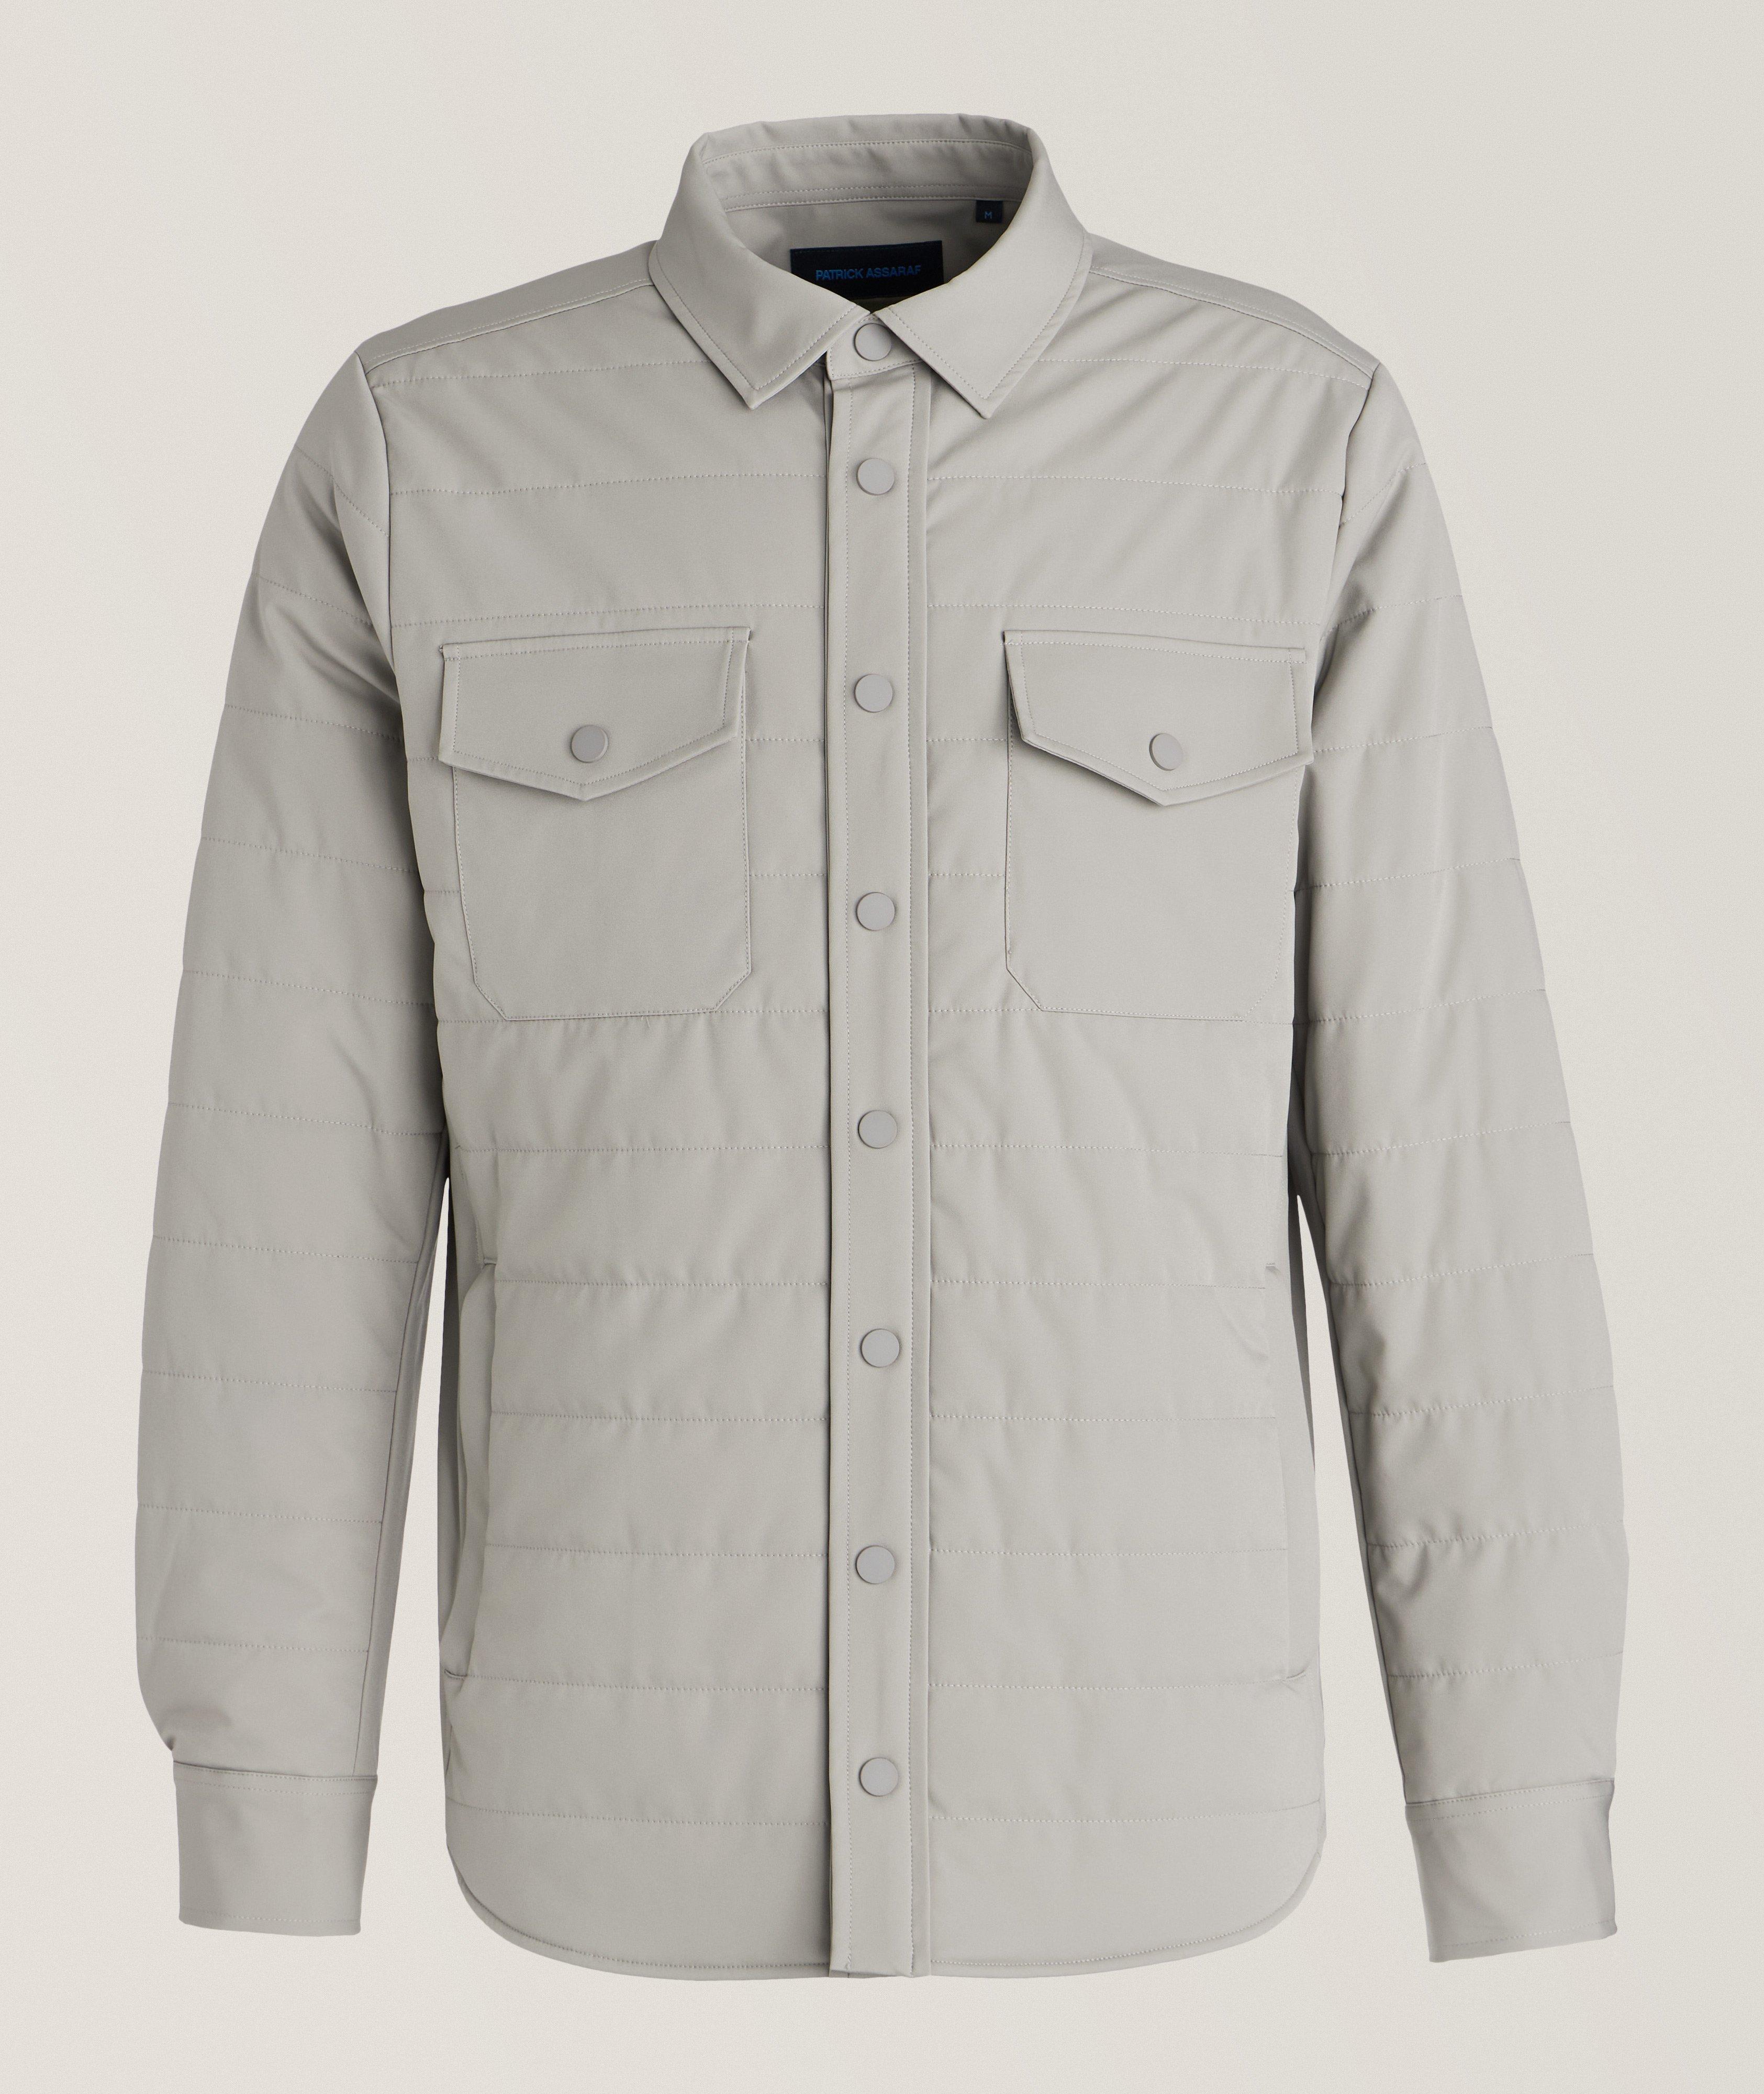 Quilted Lightweight Shirt Jacket  image 0